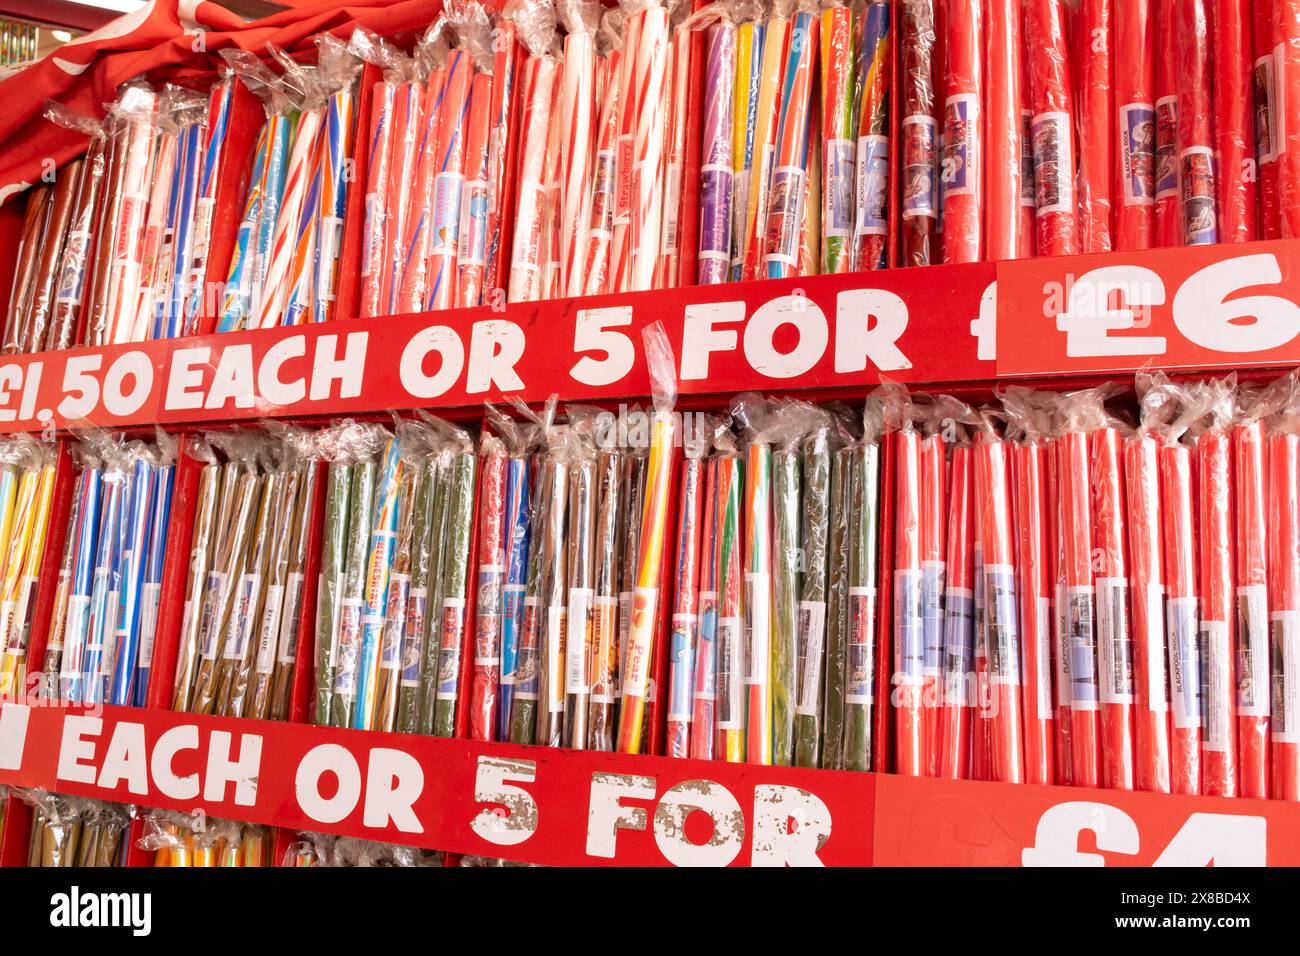 Blackpool rock shop display. Stick of rock text £1.50 each Stock Photo